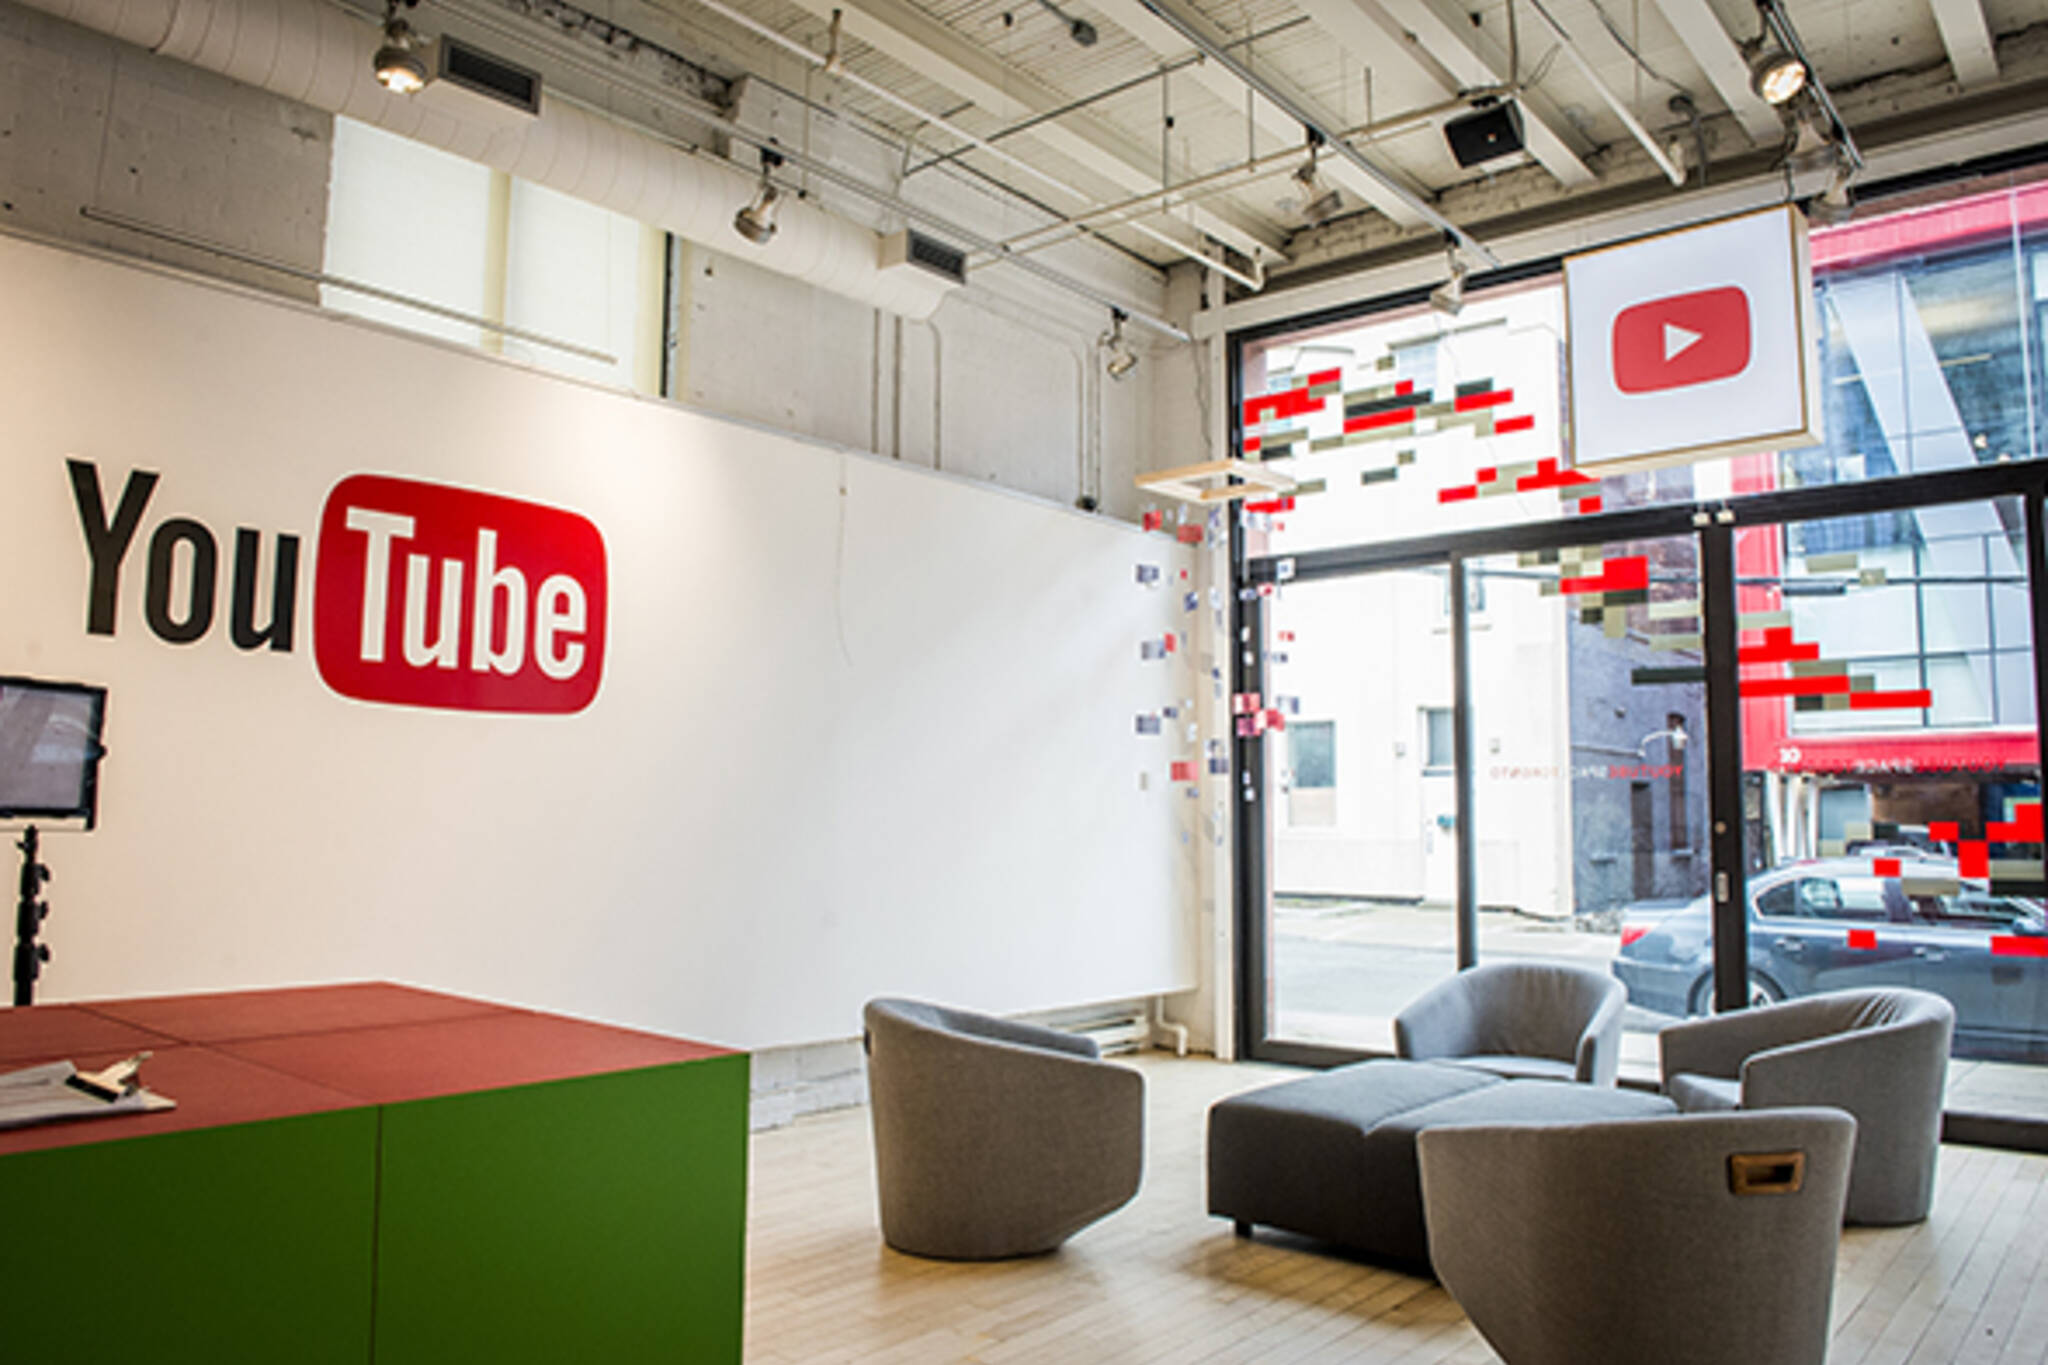  YouTube  opens space  for video creators in Toronto